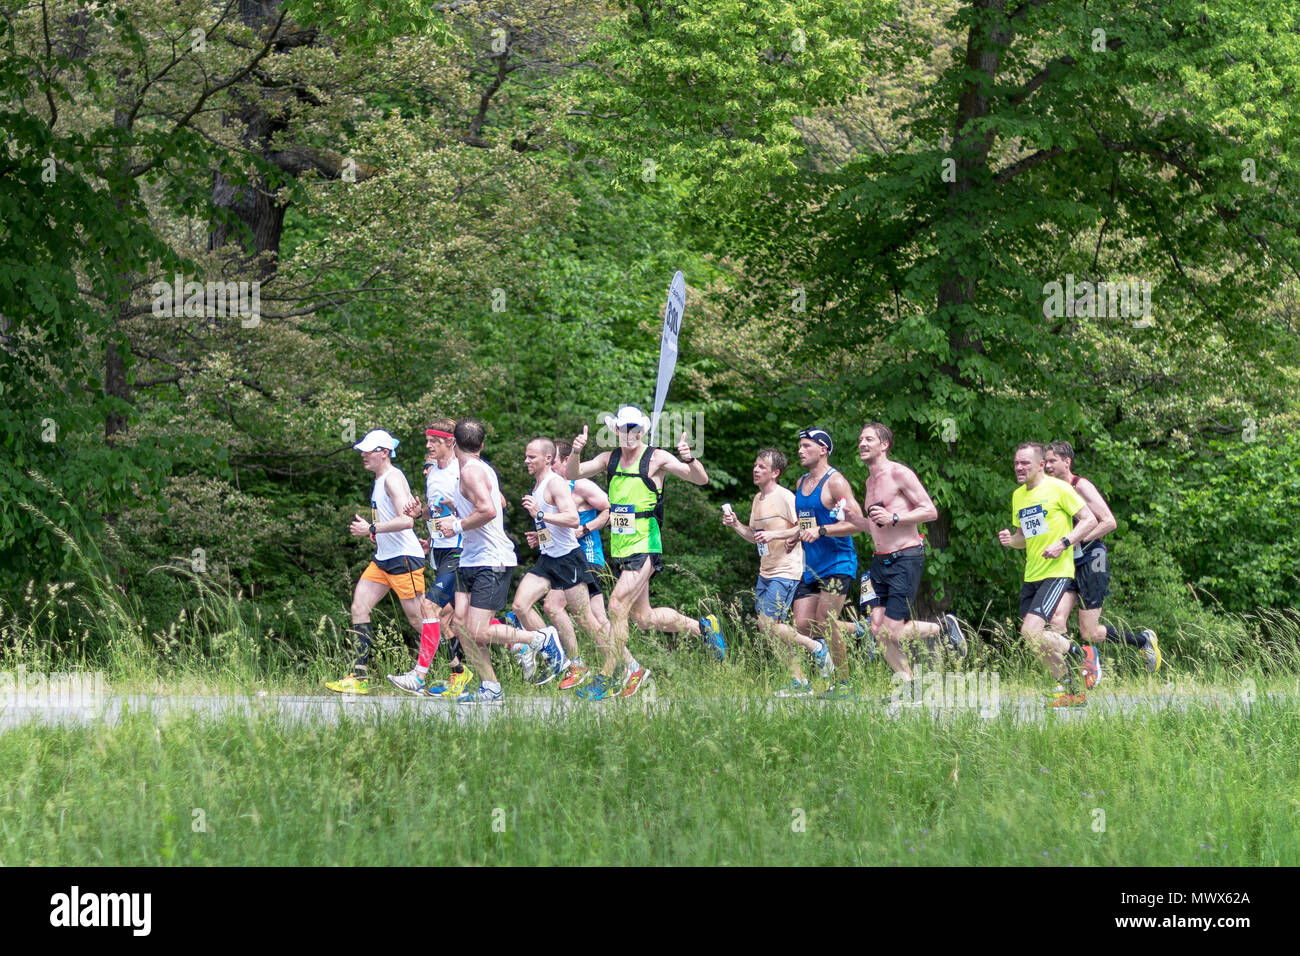 Stockhom, Sweden. 2nd June 2018. Runners in lush surroundings during the Stockholm Marathon 2018 in very hot conditions. Credit: Stefan Holm/Alamy Live News Stock Photo